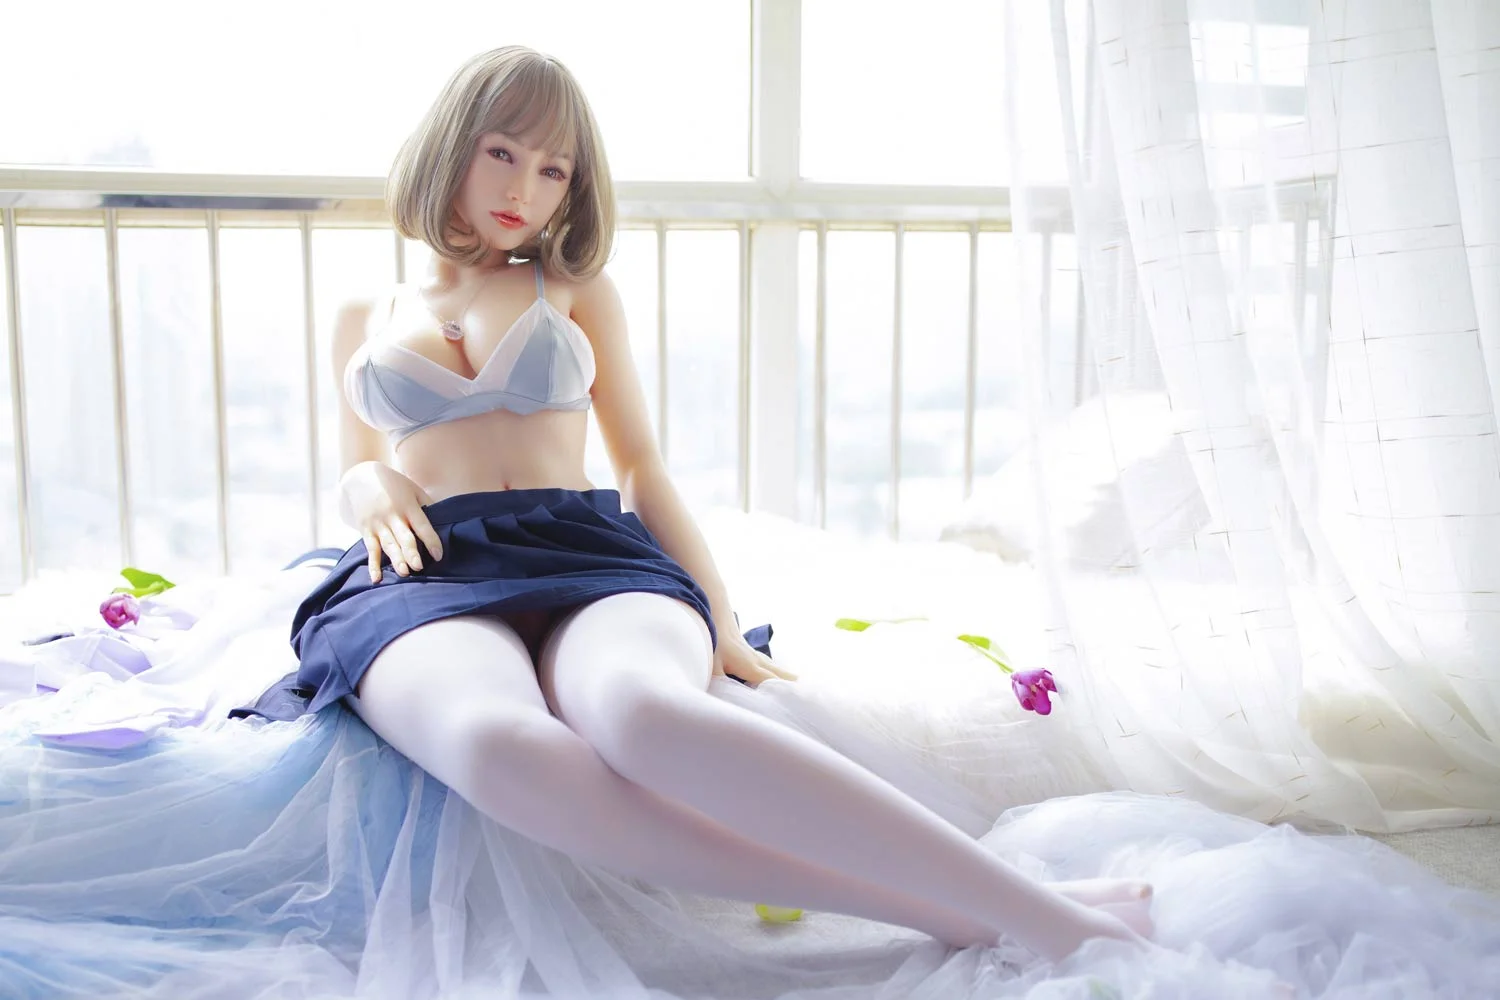 Sex doll in white stockings sitting on the windowsill